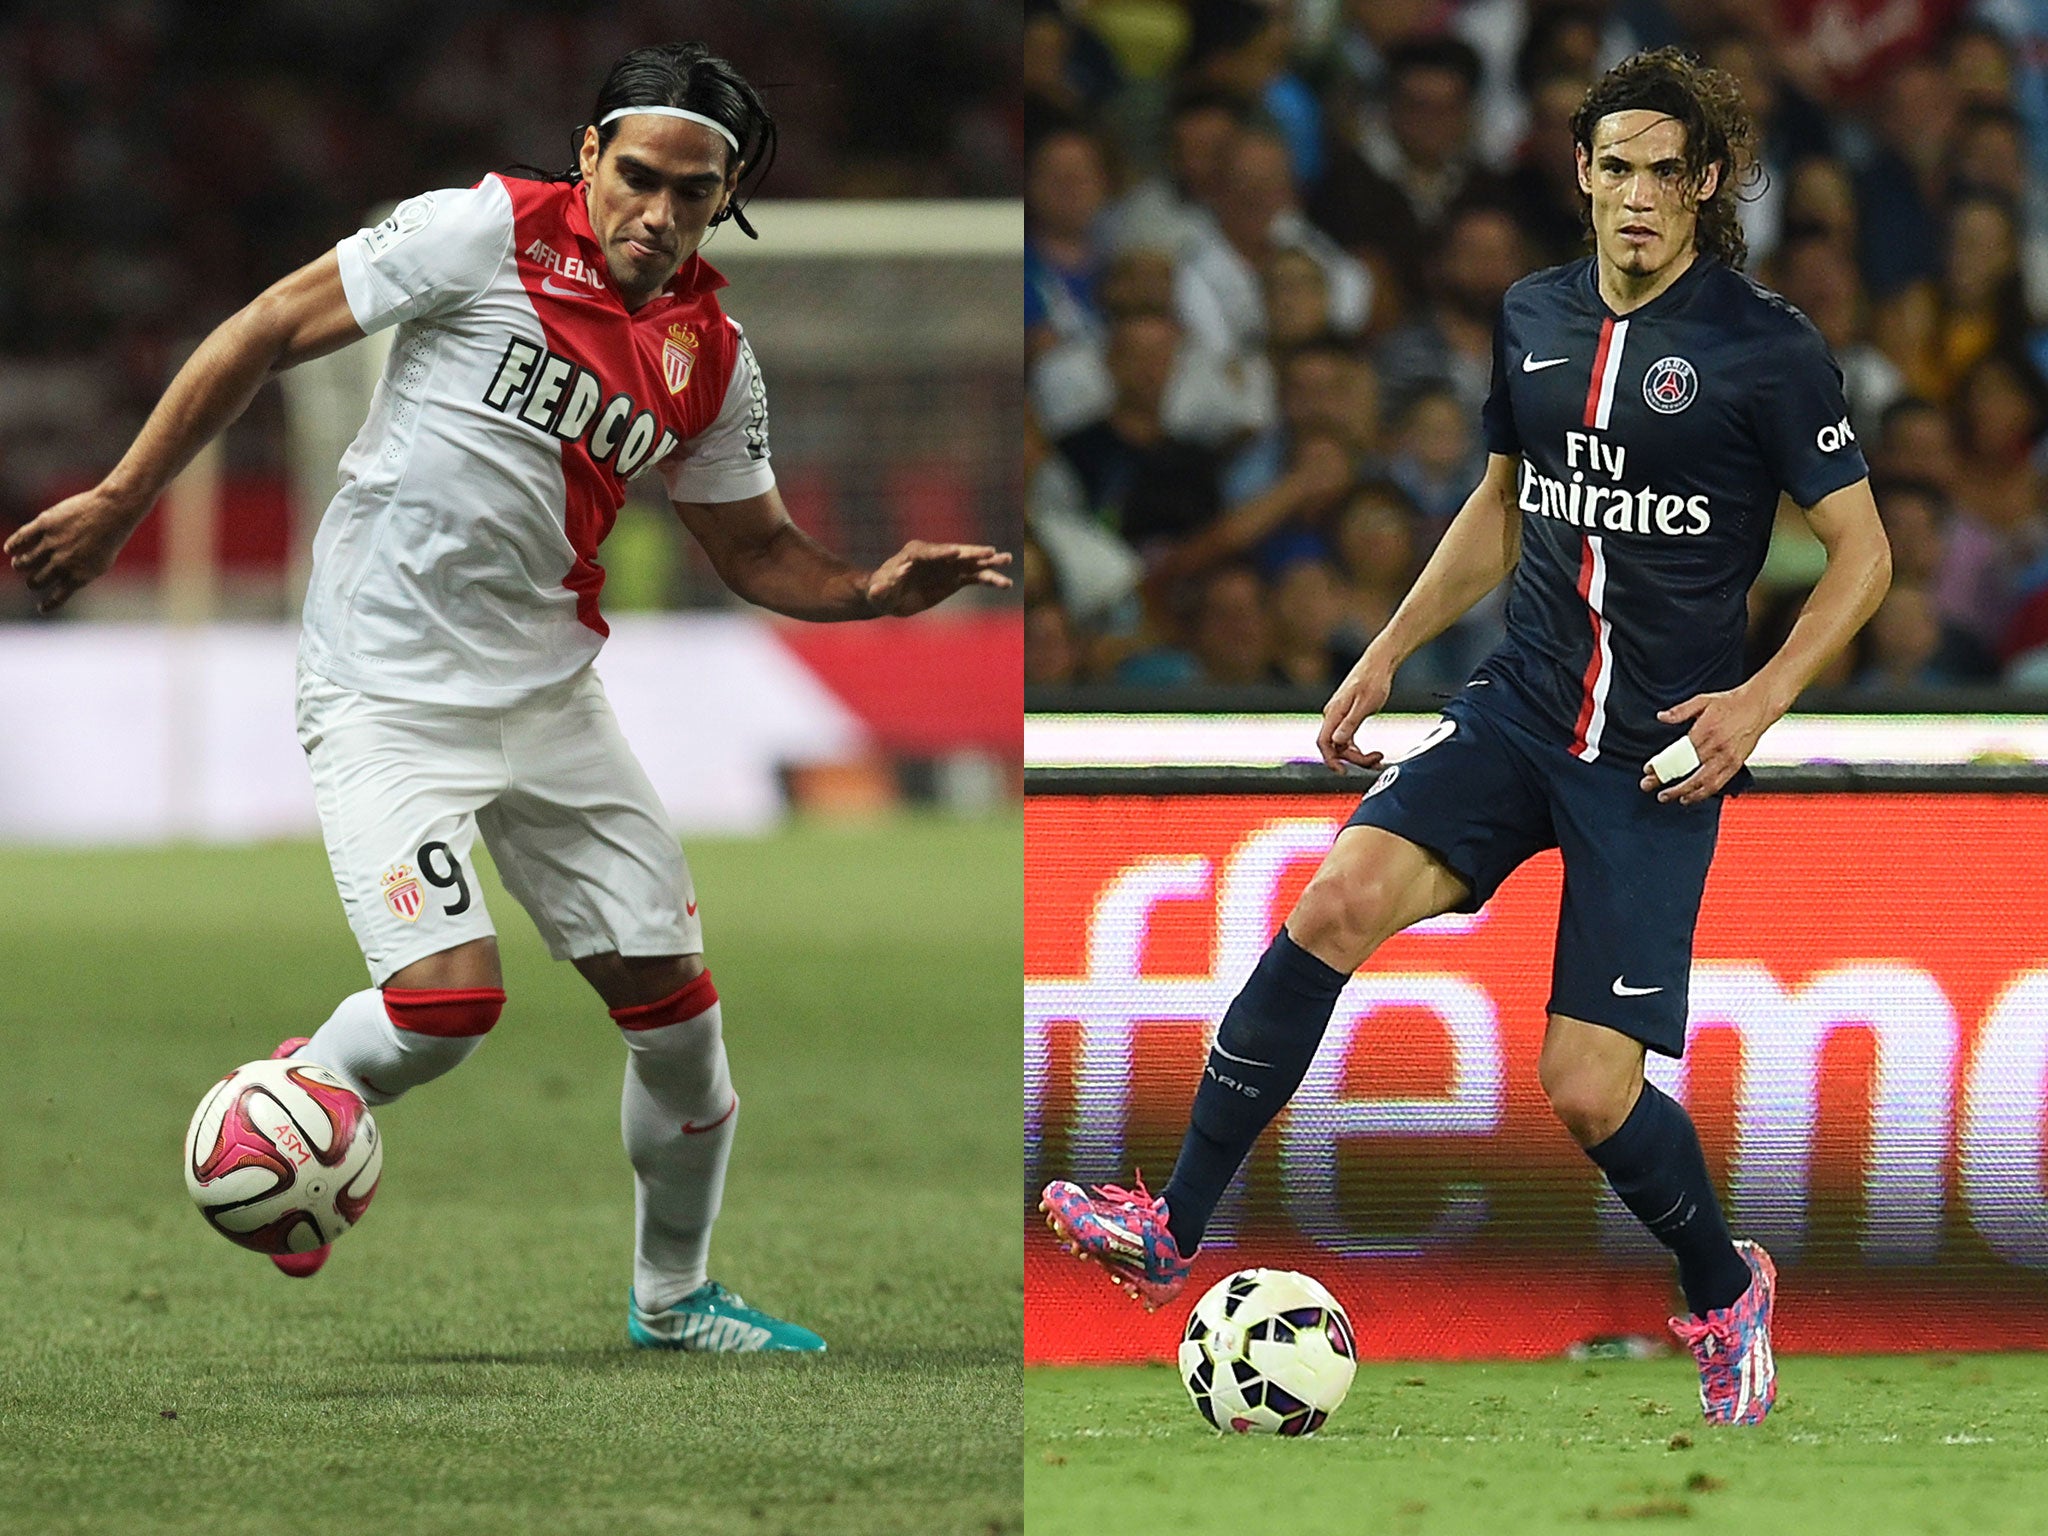 Brendan Rodgers will continue to look for a top striker with Edinson Cavani and Radamel Falcao linked